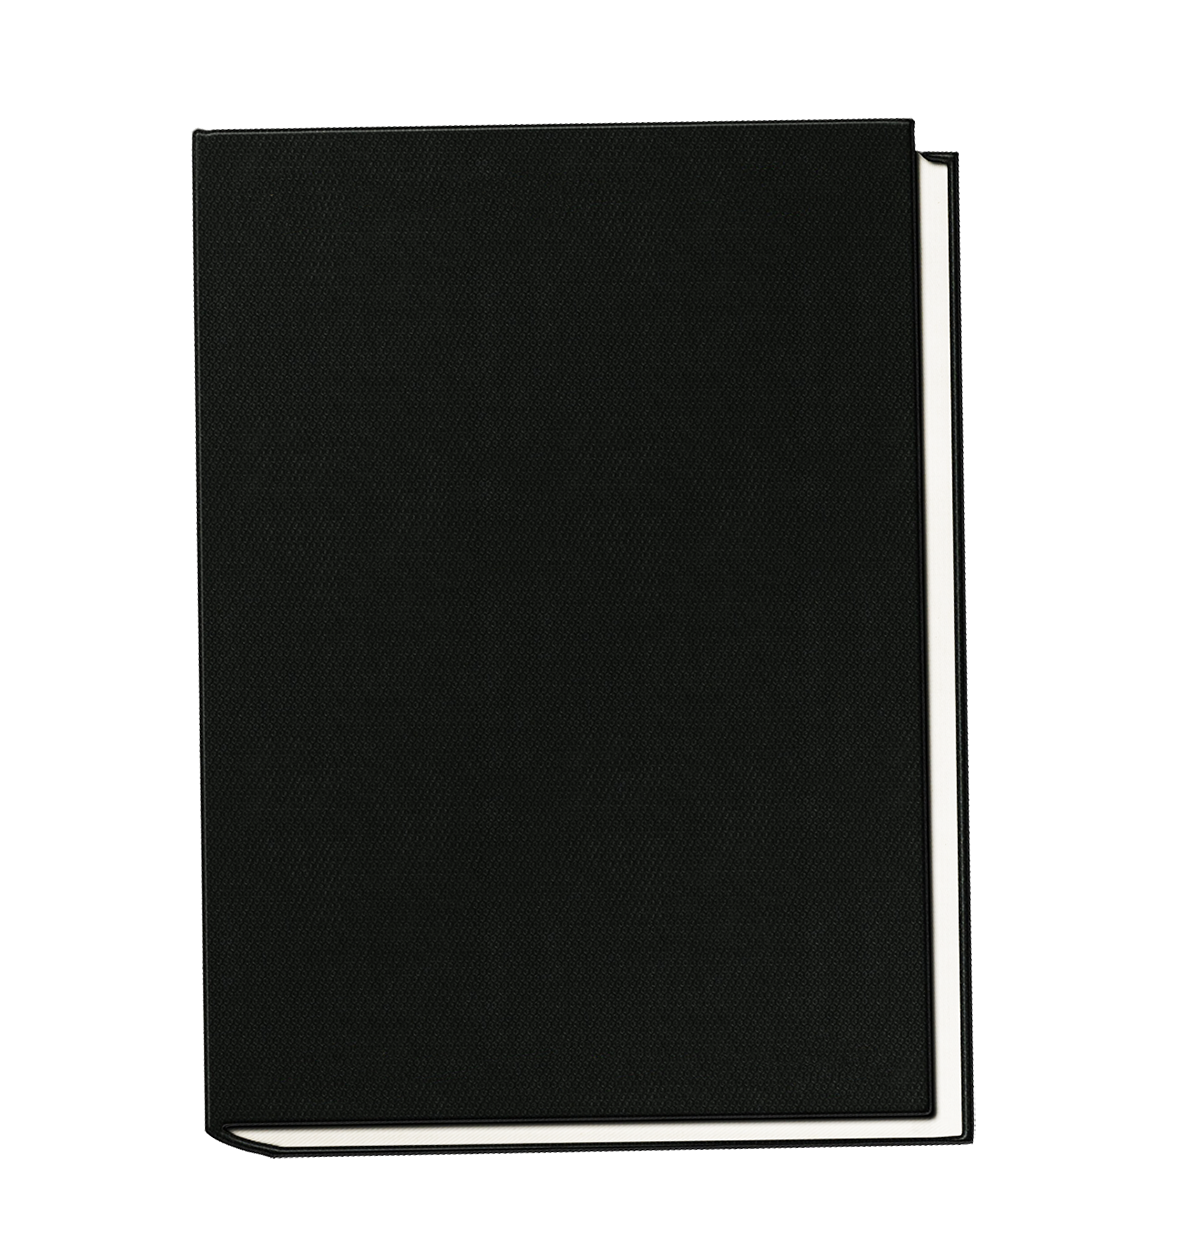 black book without decorations